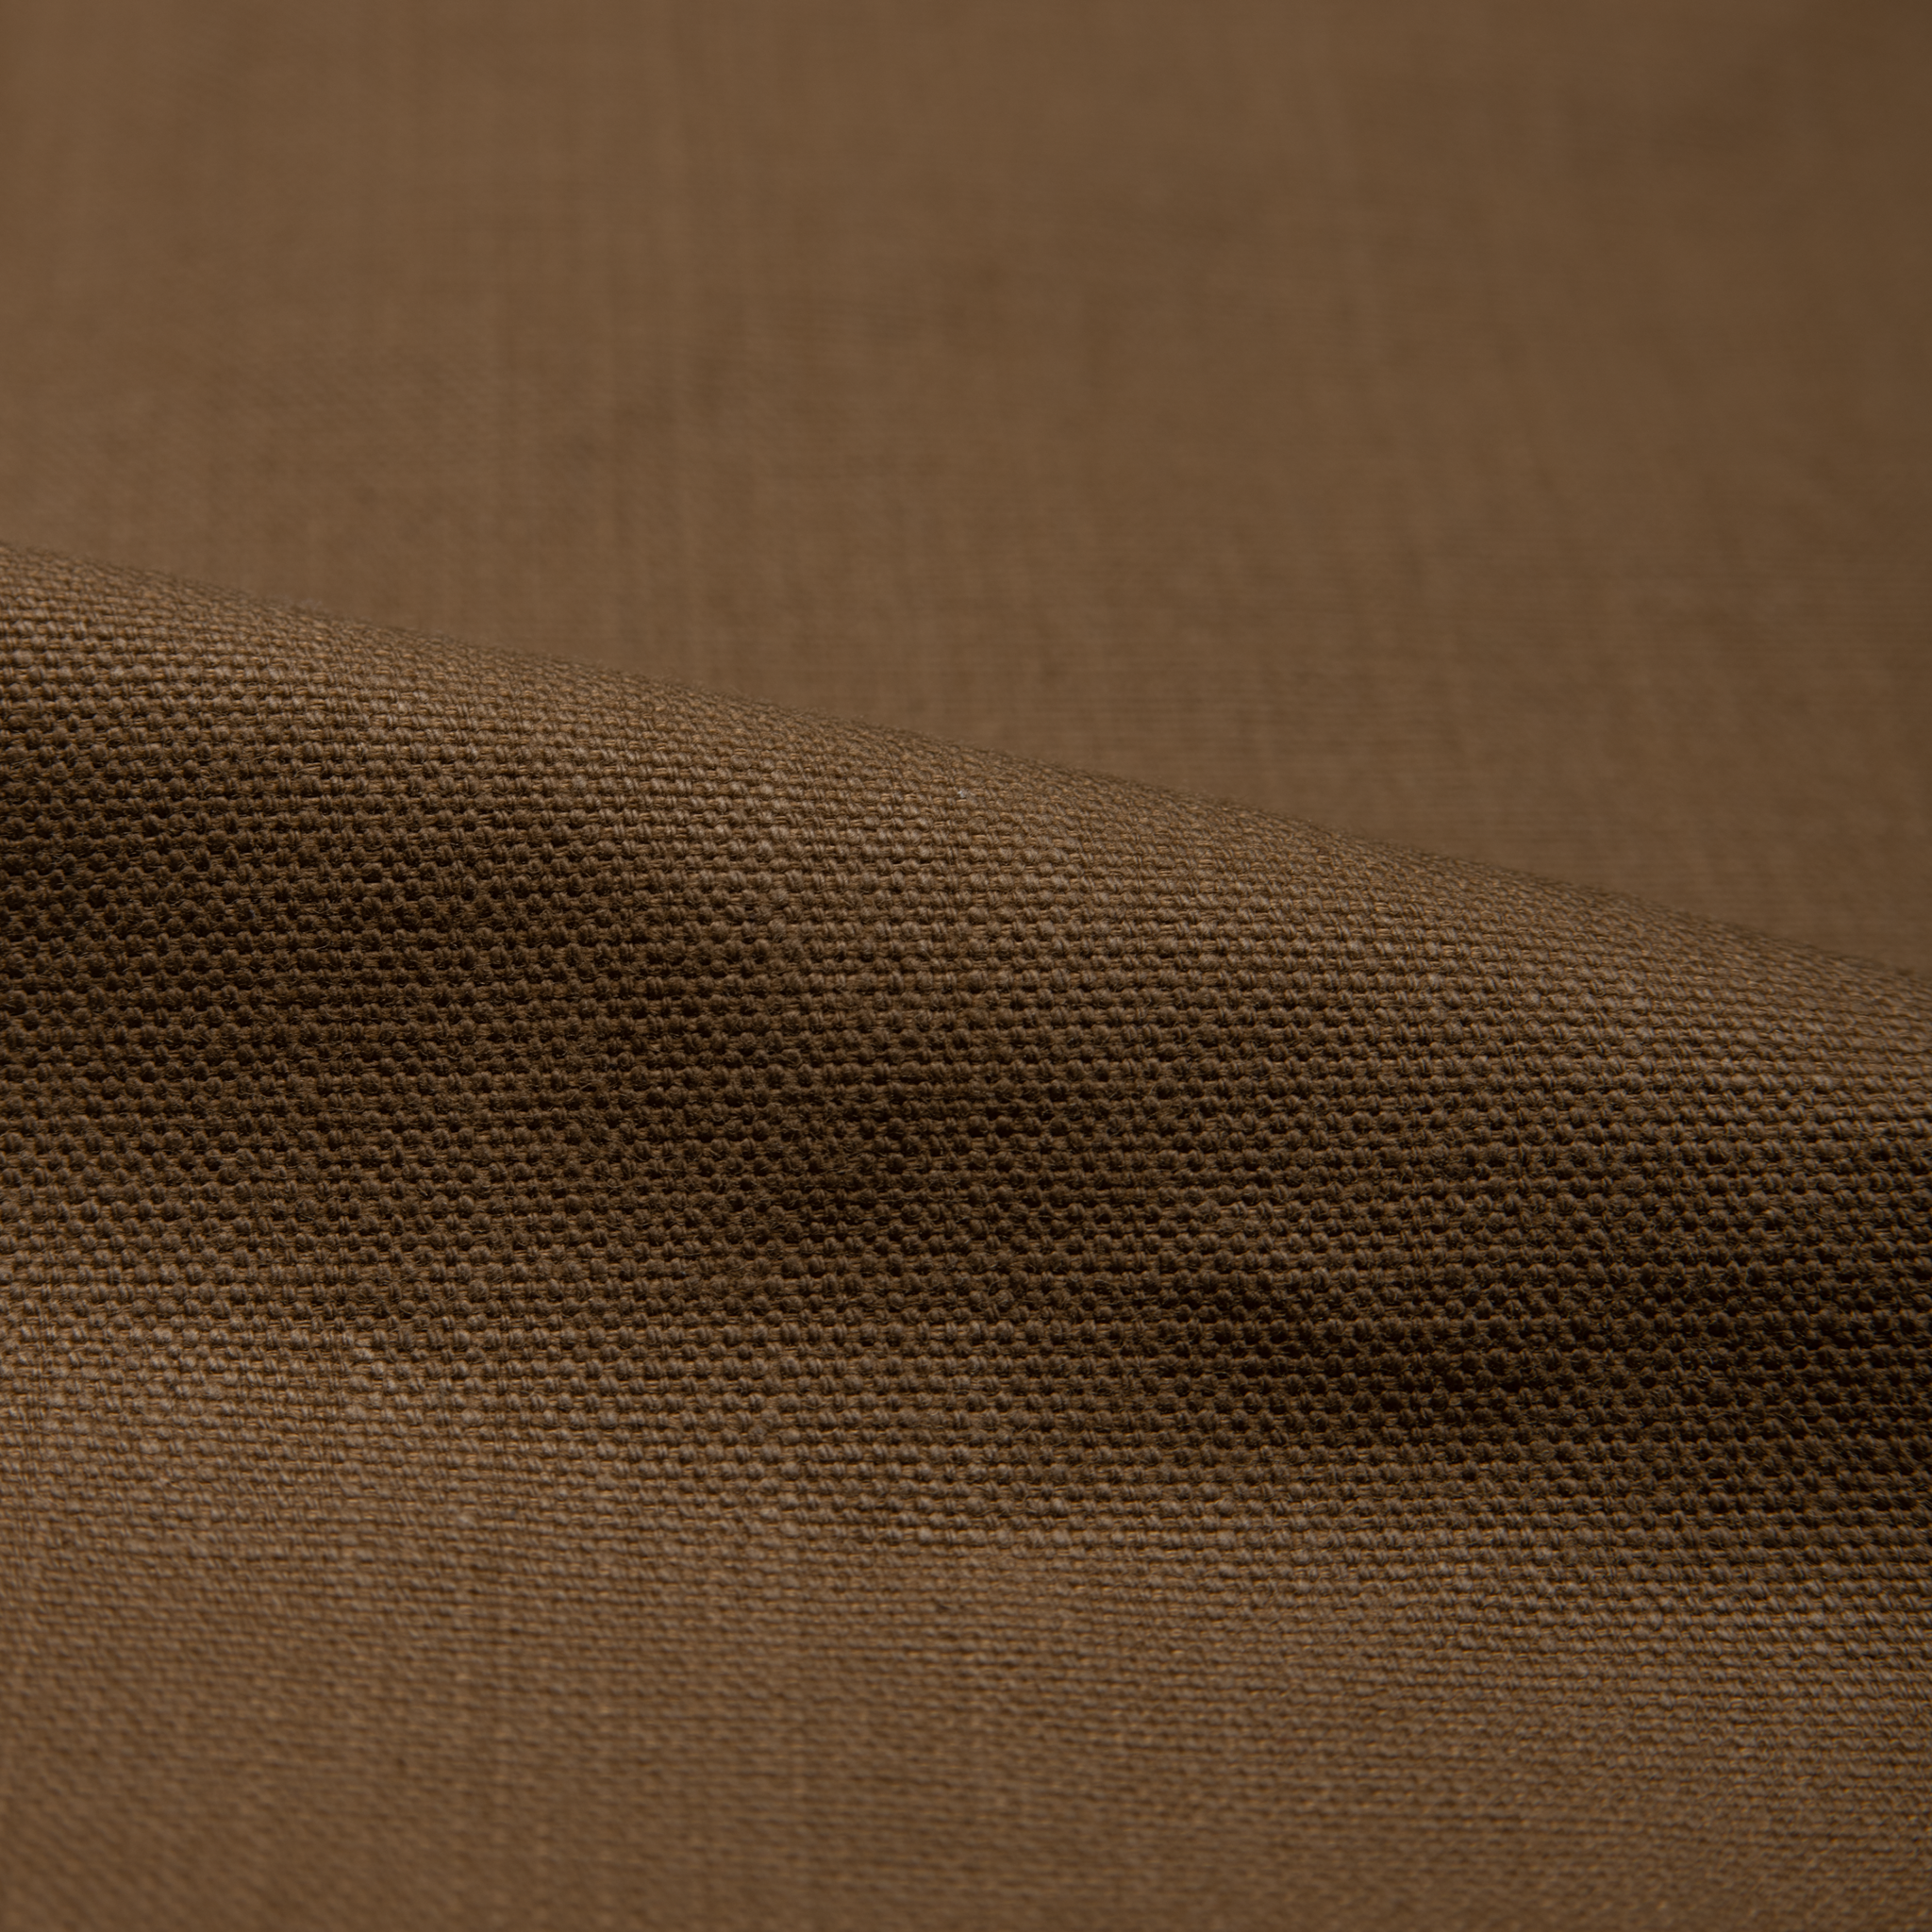  Raw Cotton Canvas Brown - Smart Jacket - fabric 